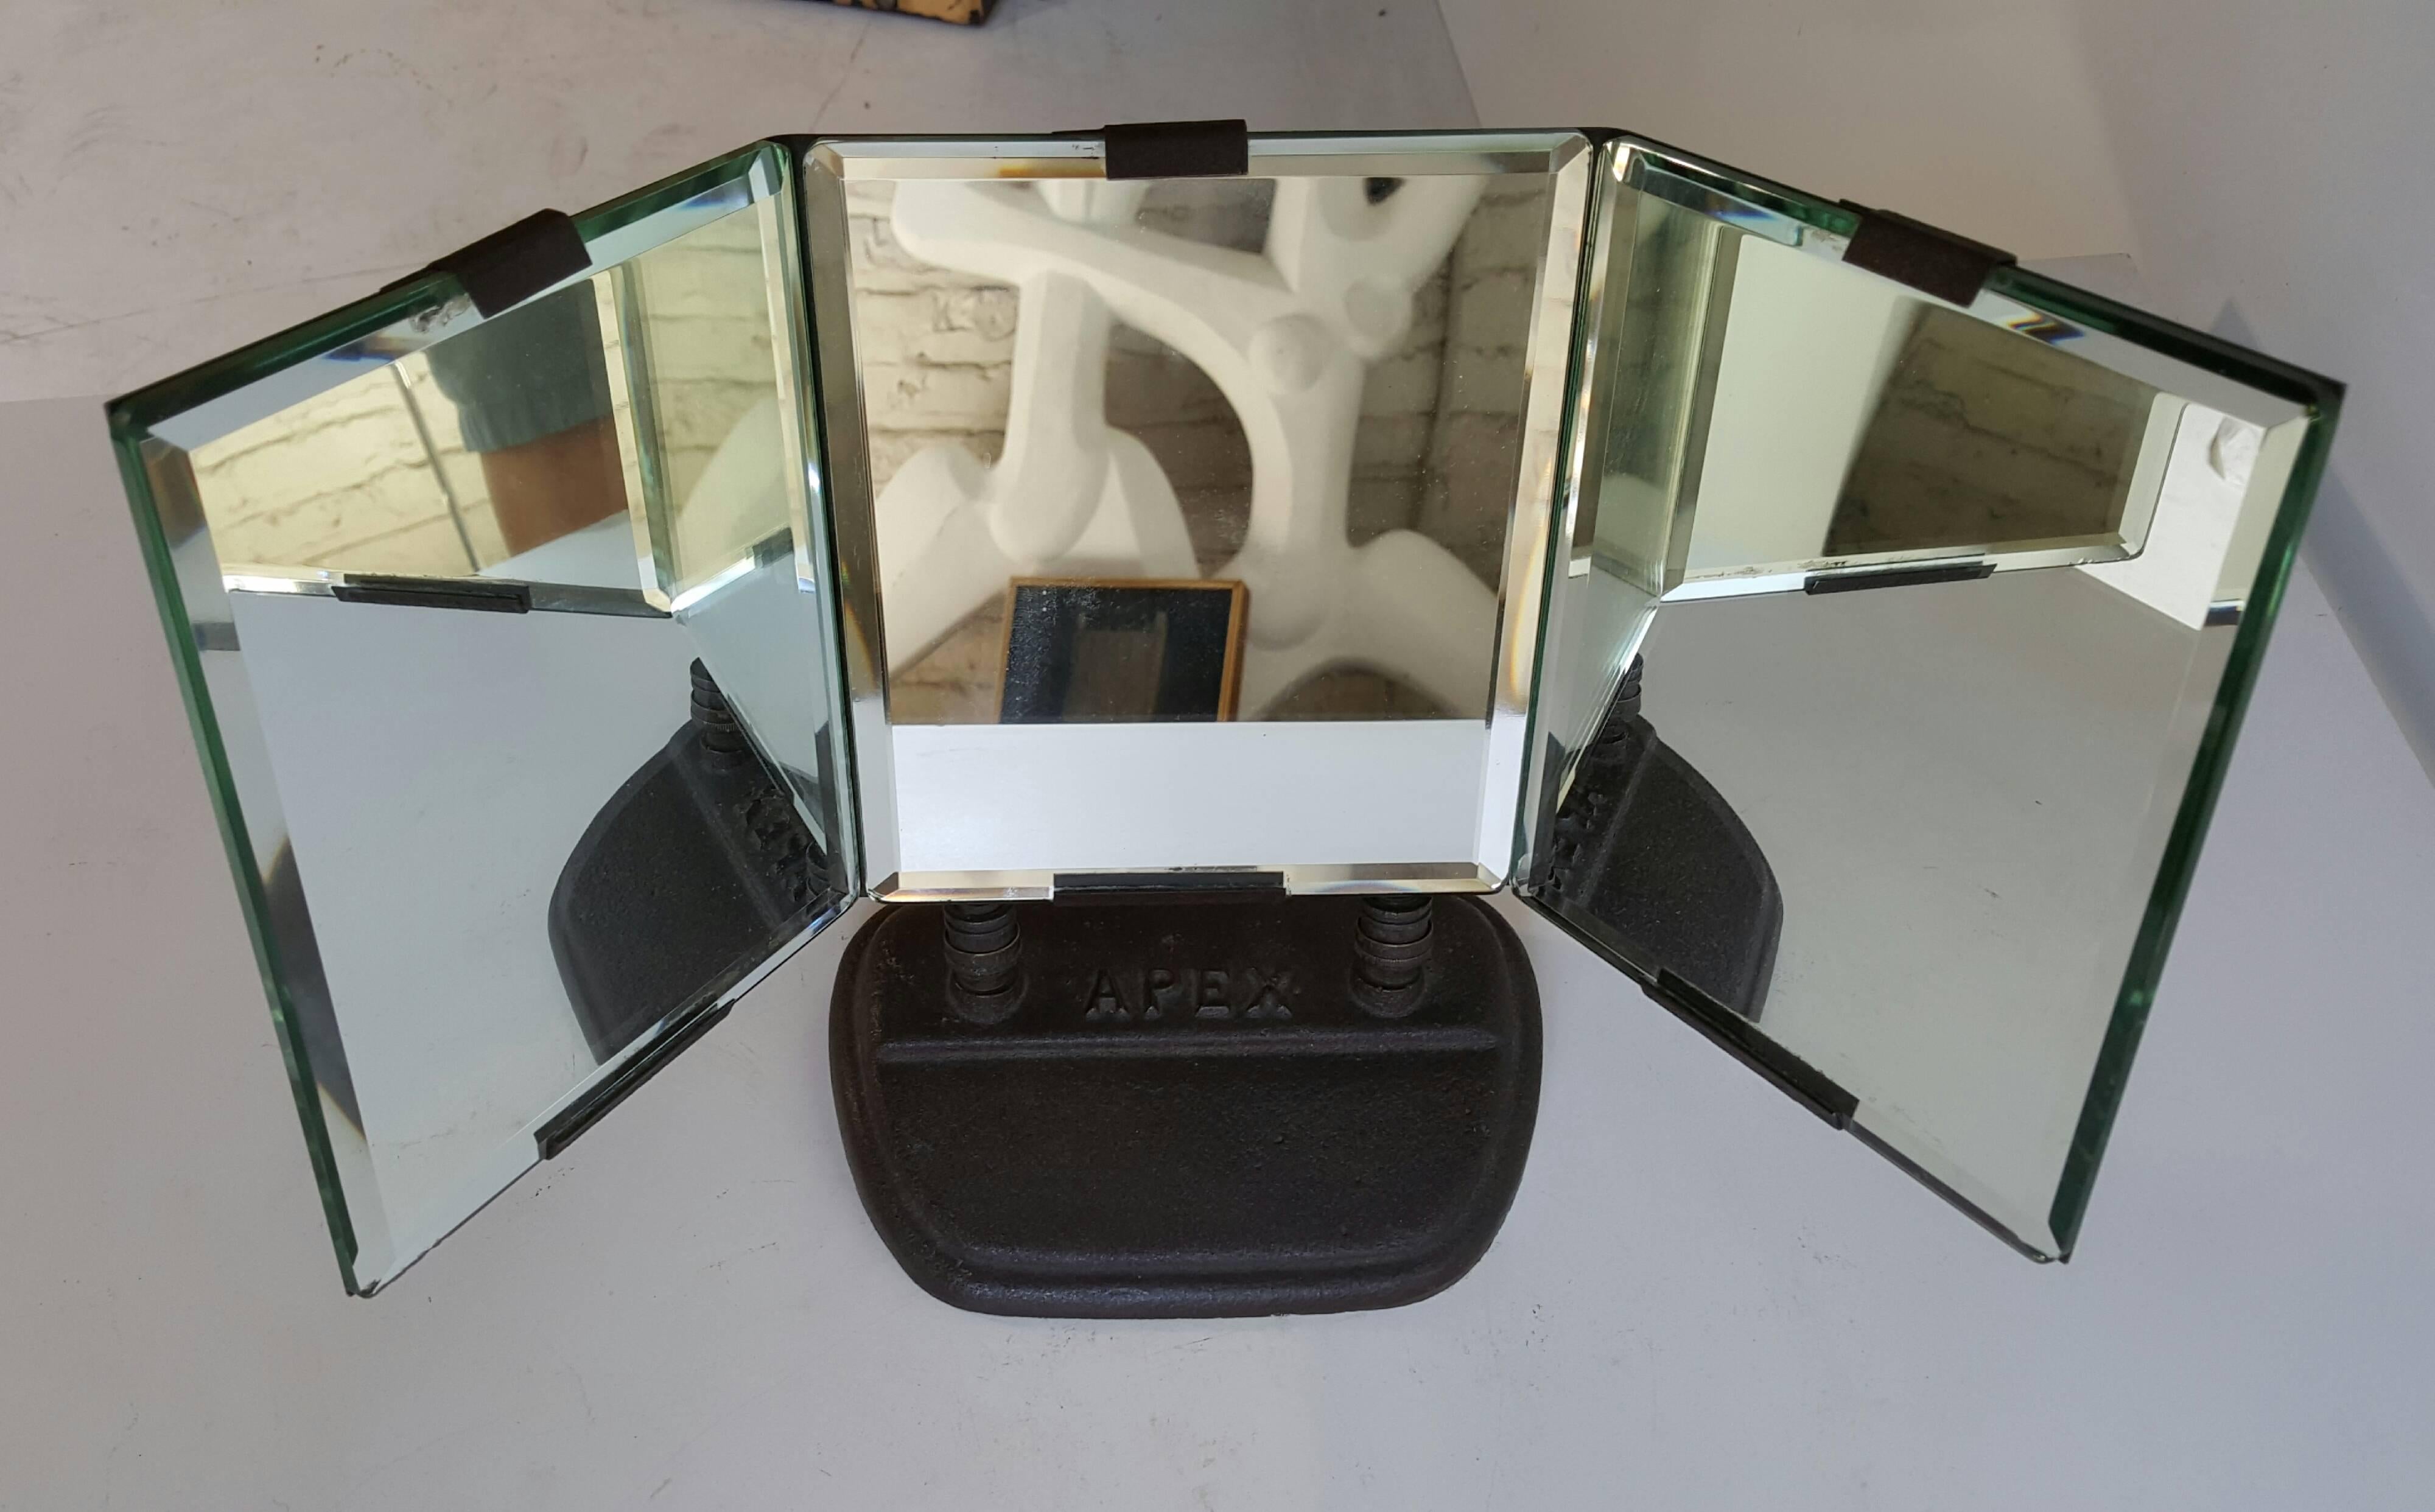 Art Deco triple mirror adjustable forward and backward motion featuring three bevel mirrors, wonderful scale and proportion, metal, Industrial yet sleek, elegant design, mint original condition and manufactured by Apex.